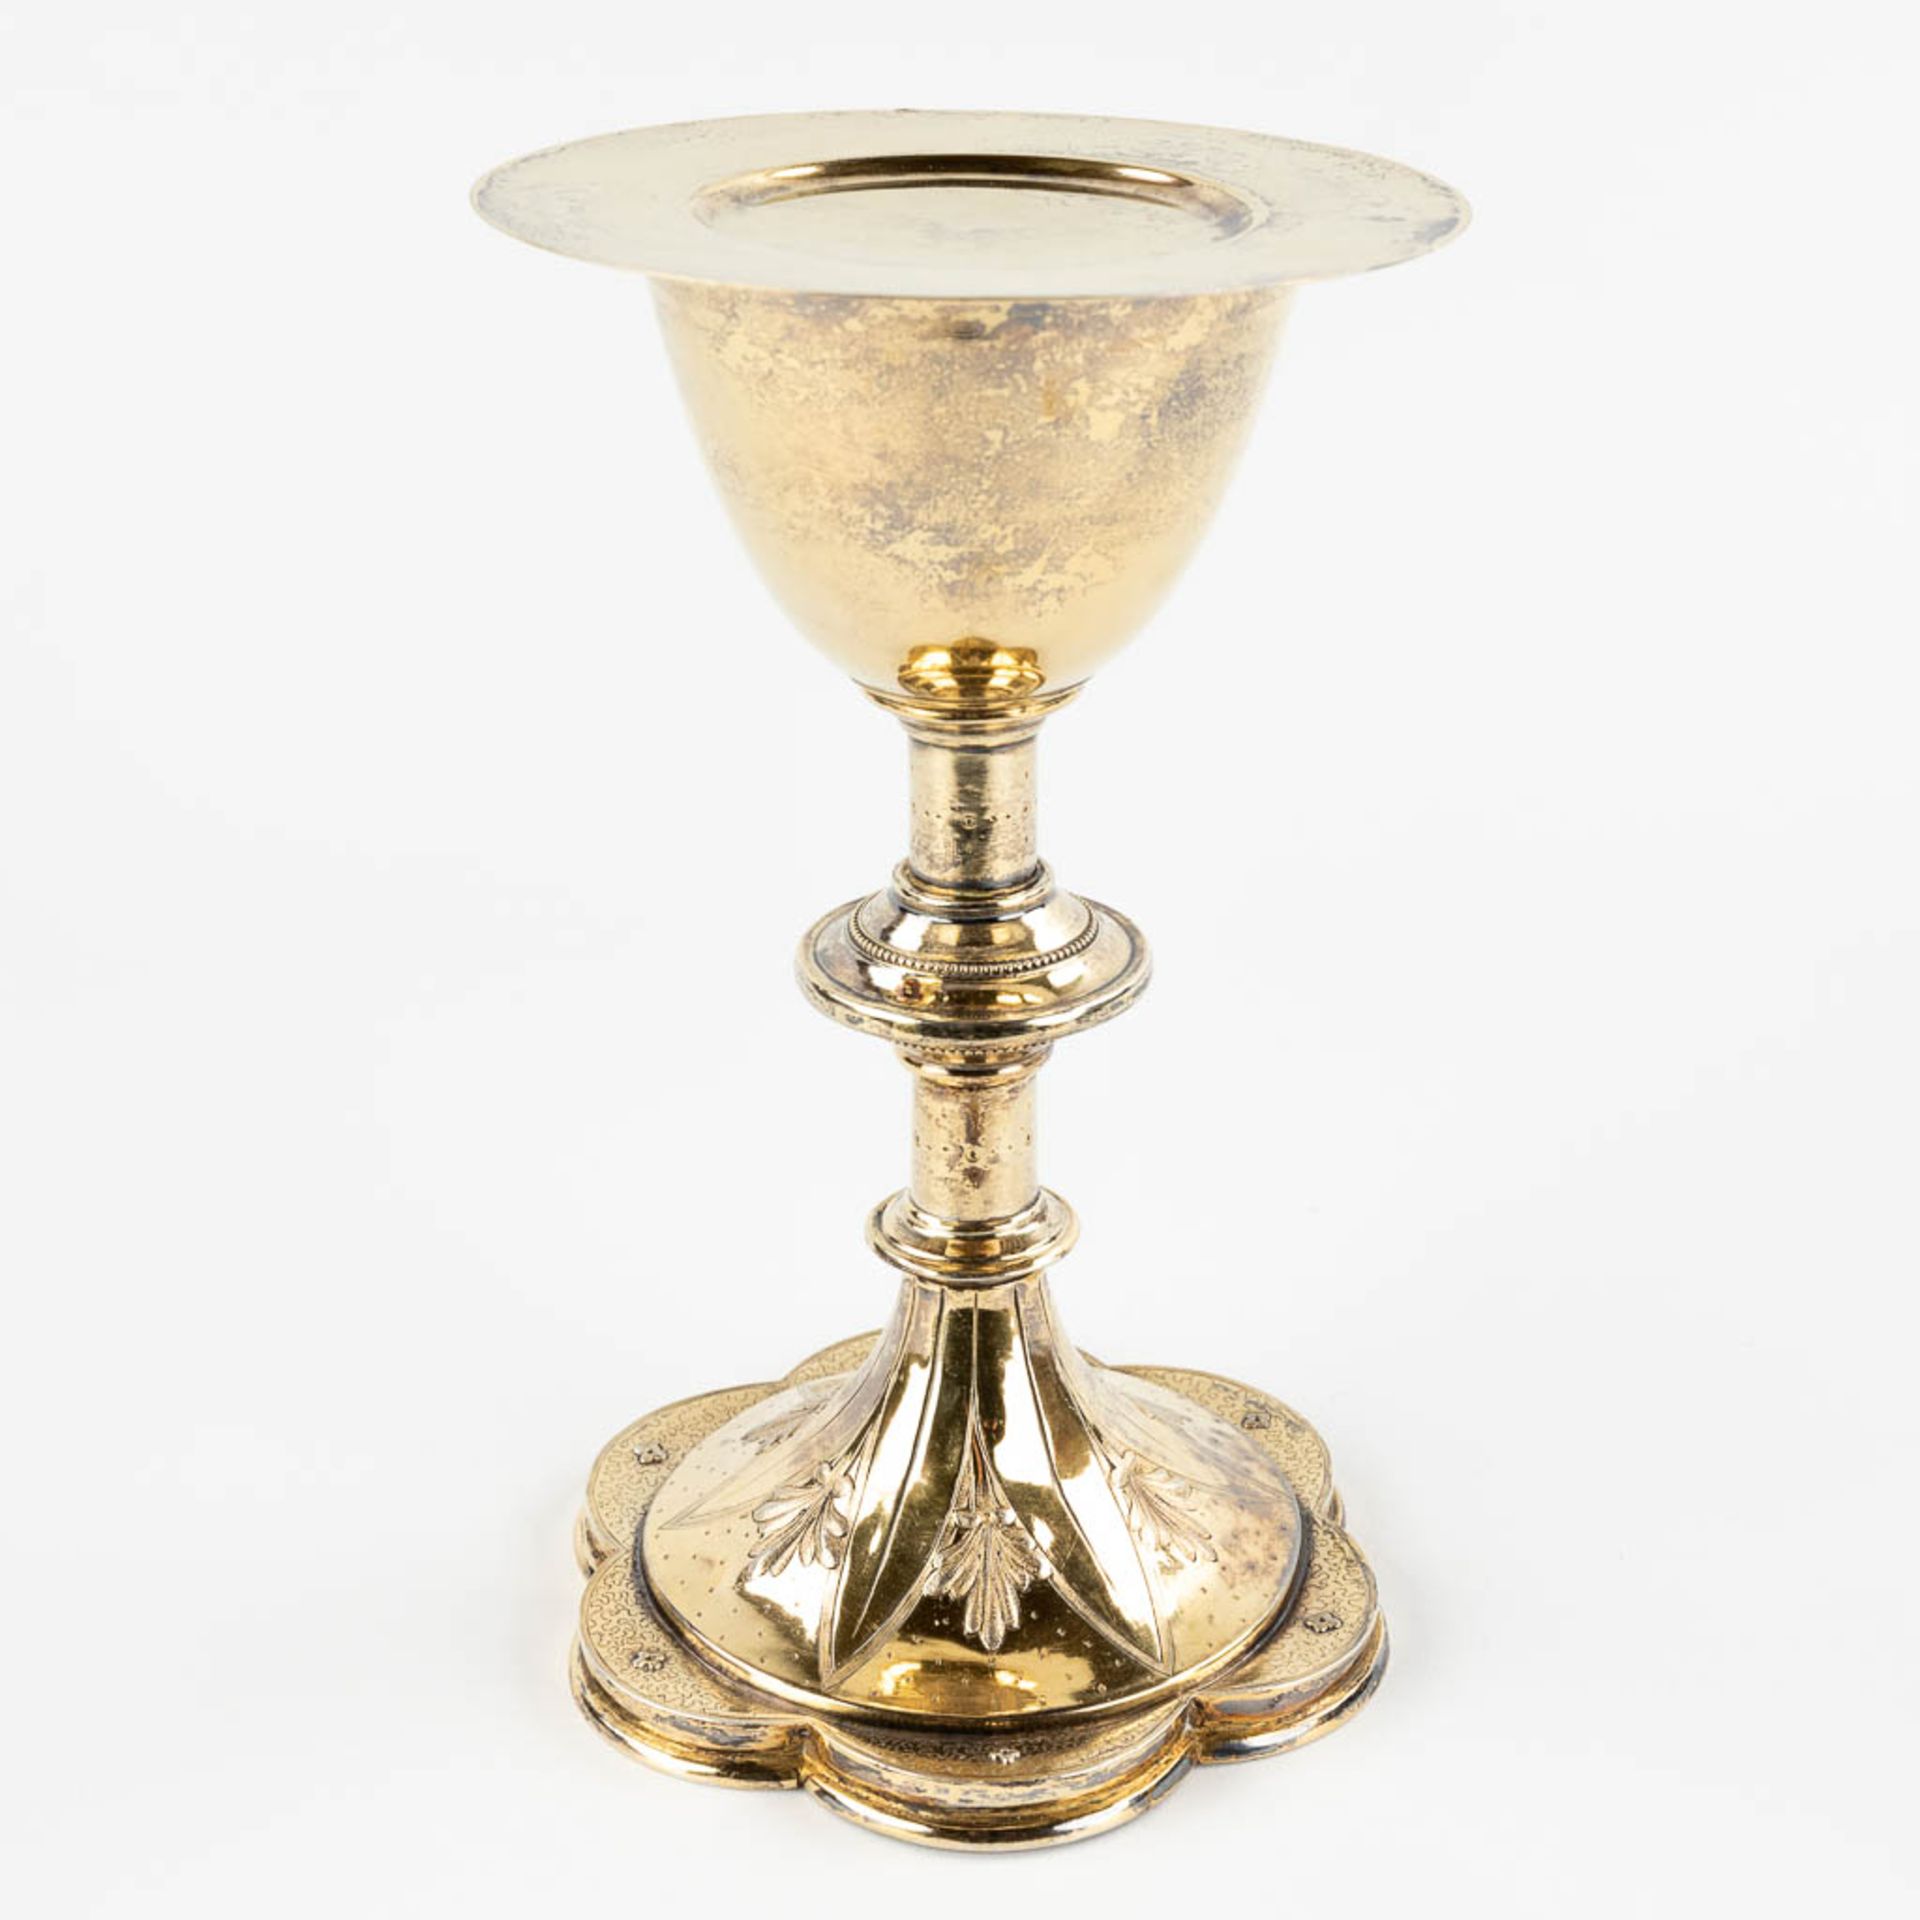 A Chalice with paten, gilt silver in gothic revival style. 305g. (H:19,5 x D:12,5 cm) - Image 5 of 16